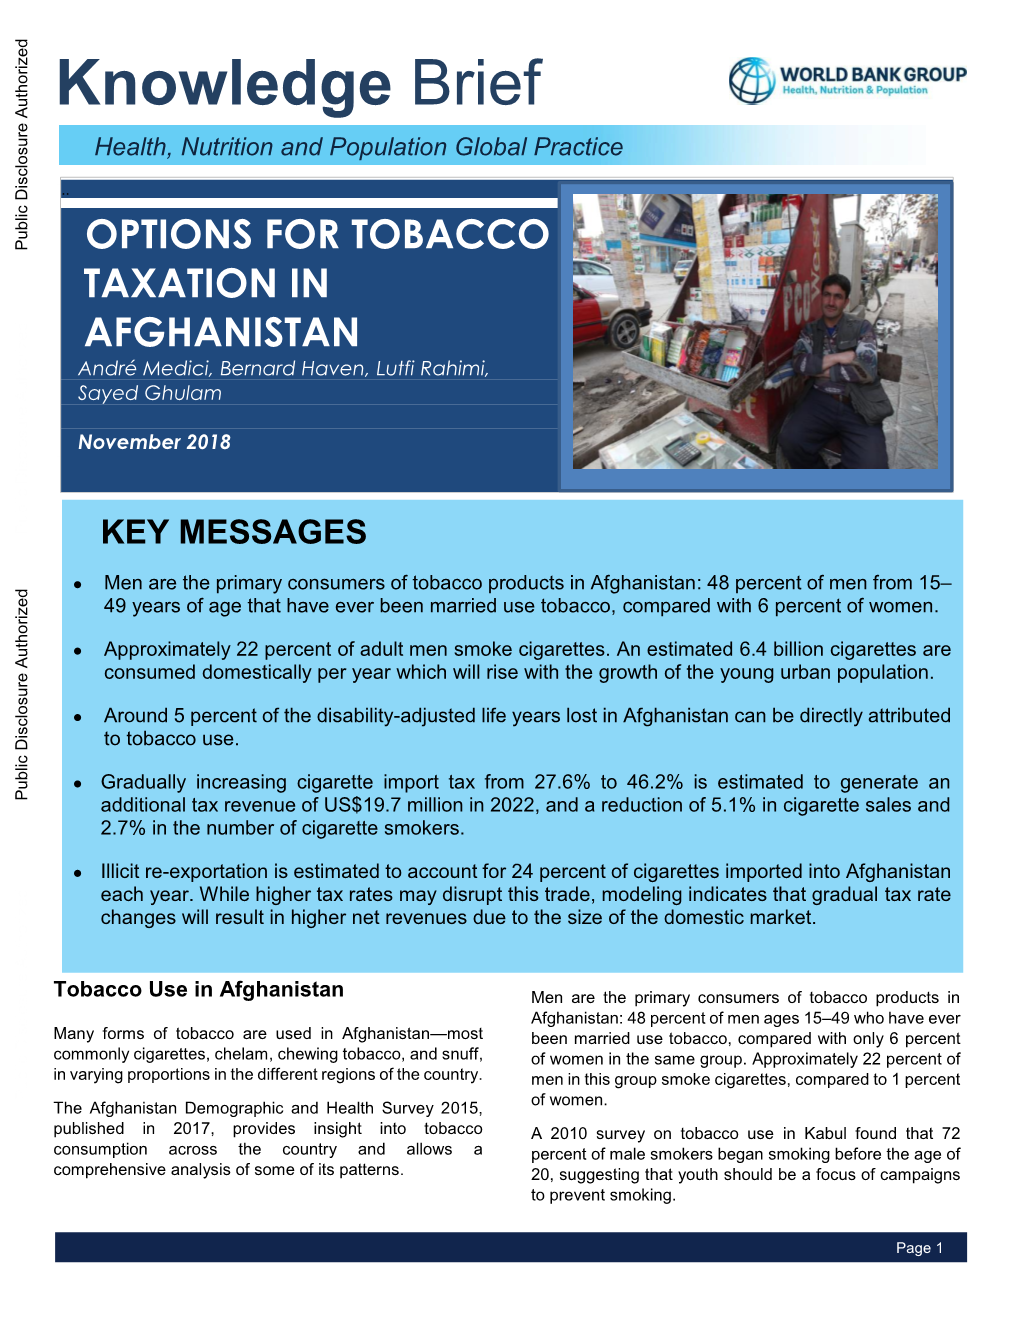 Options for Tobacco Taxation in Afghanistan” by Andre Medici, Bernard Haven, and Lutfi Rahimi (Forthcoming)